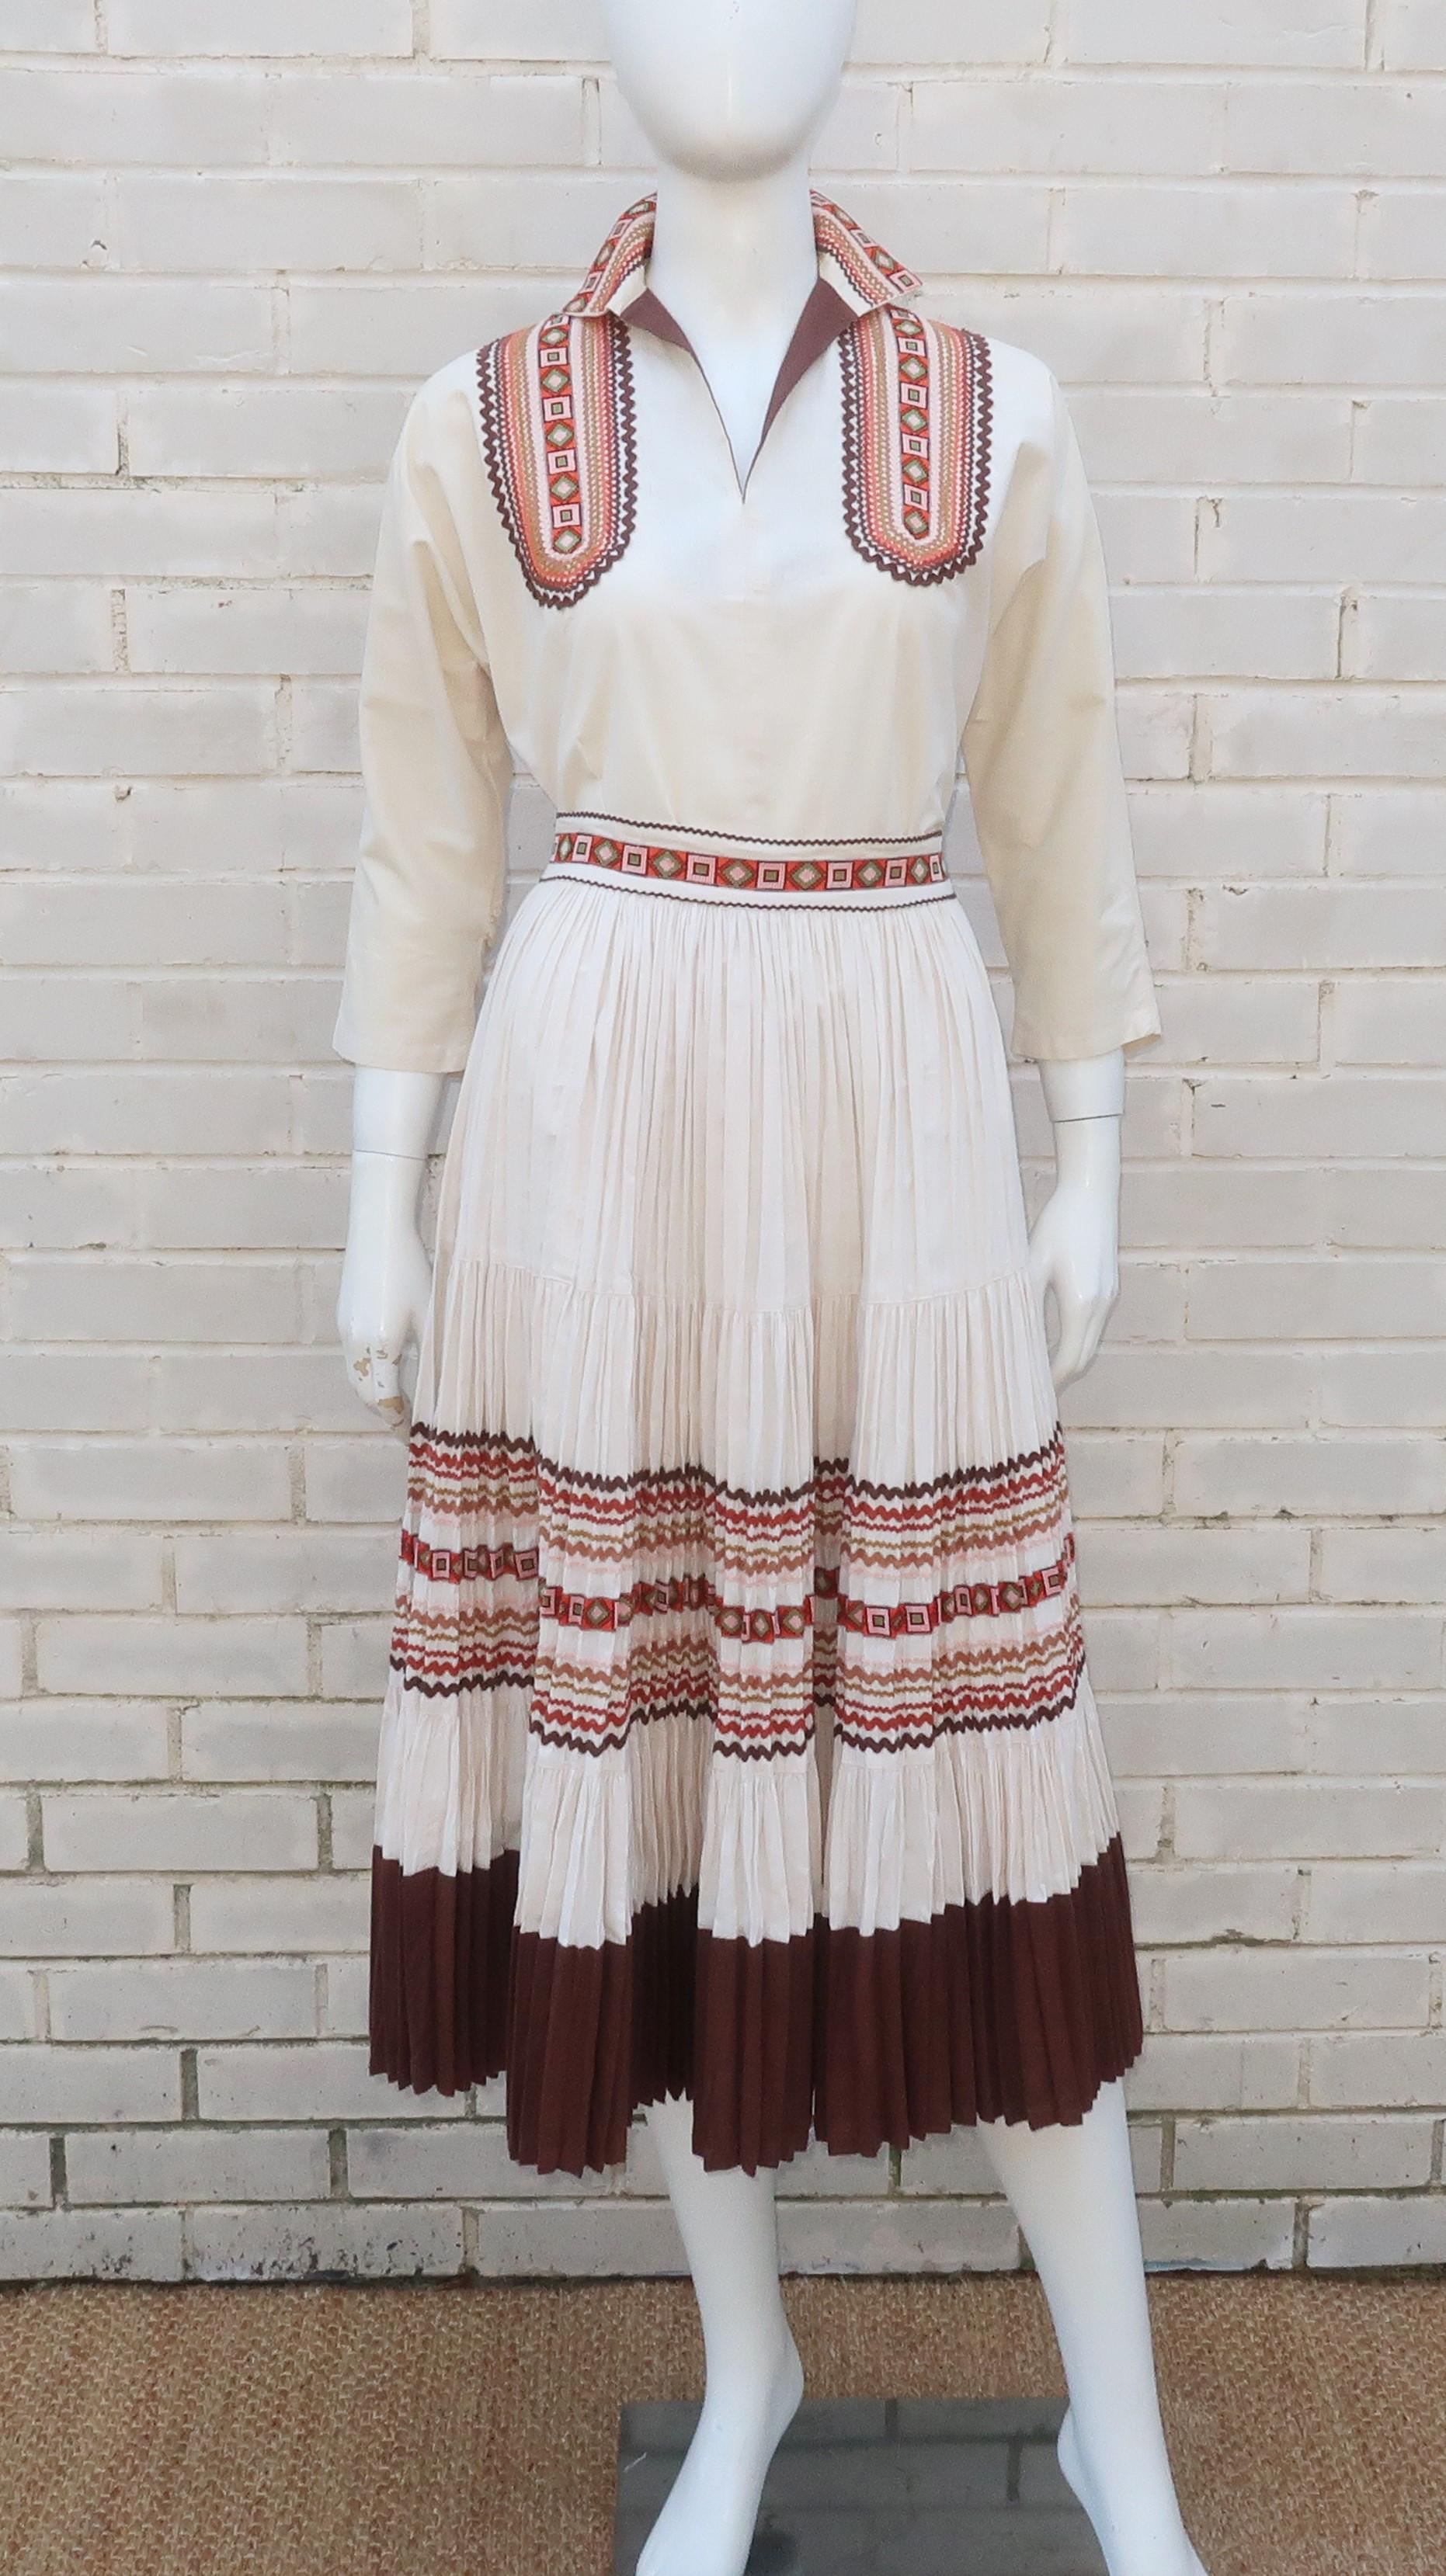 Patio dresses came into fashion from the 1940's through the 1950's and incorporated Native American motifs with the casual style of a day dress for a distinct Western wear vibe.  The prominent designers for this look hailed from Arizona and often